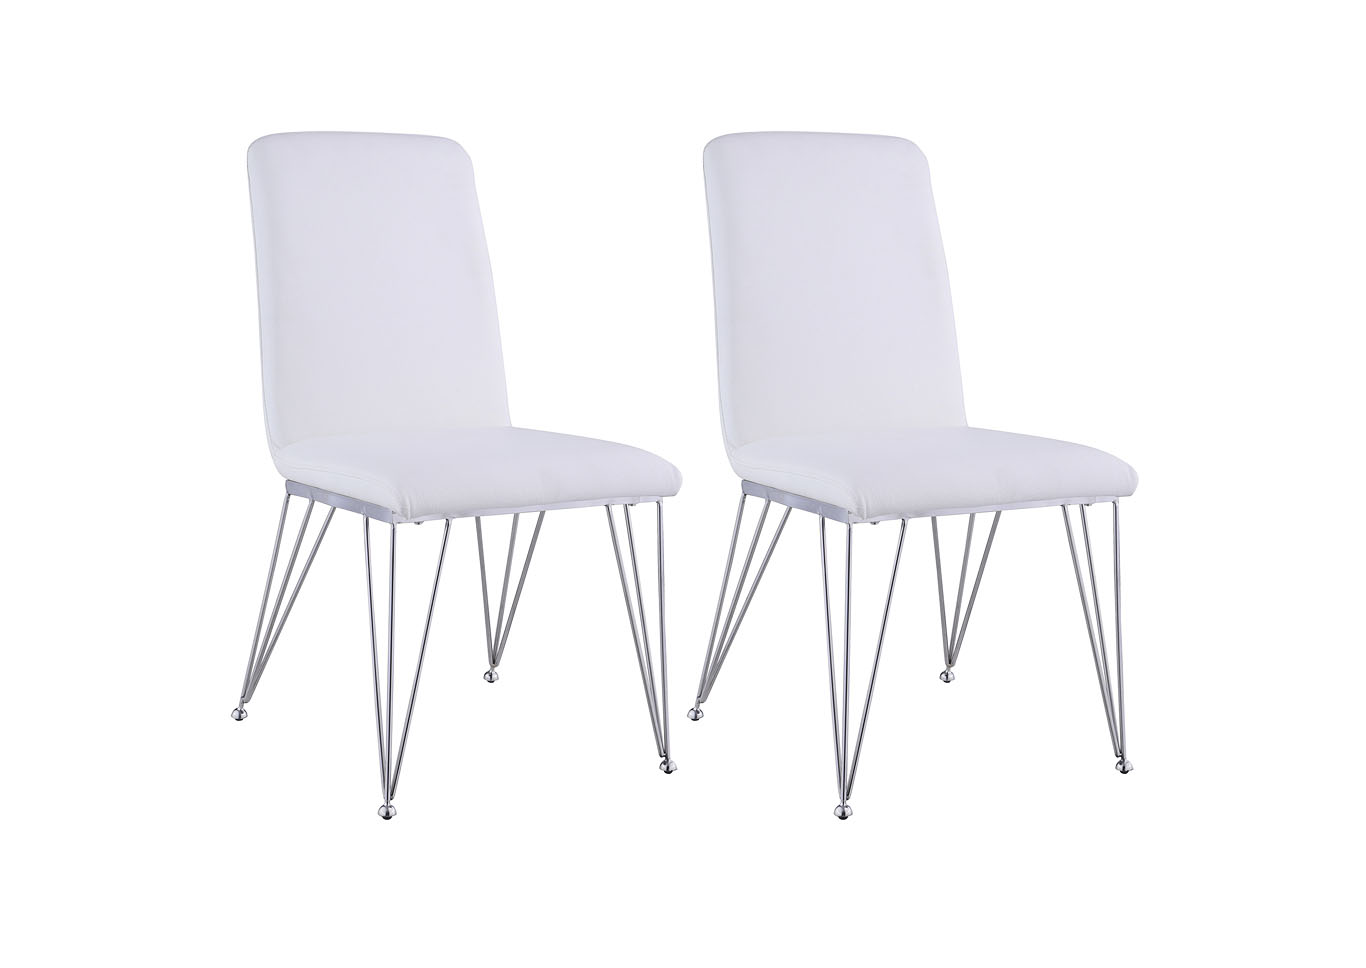 Fernanda White Upholstered Side Chair (Set of 2),Chintaly Imports